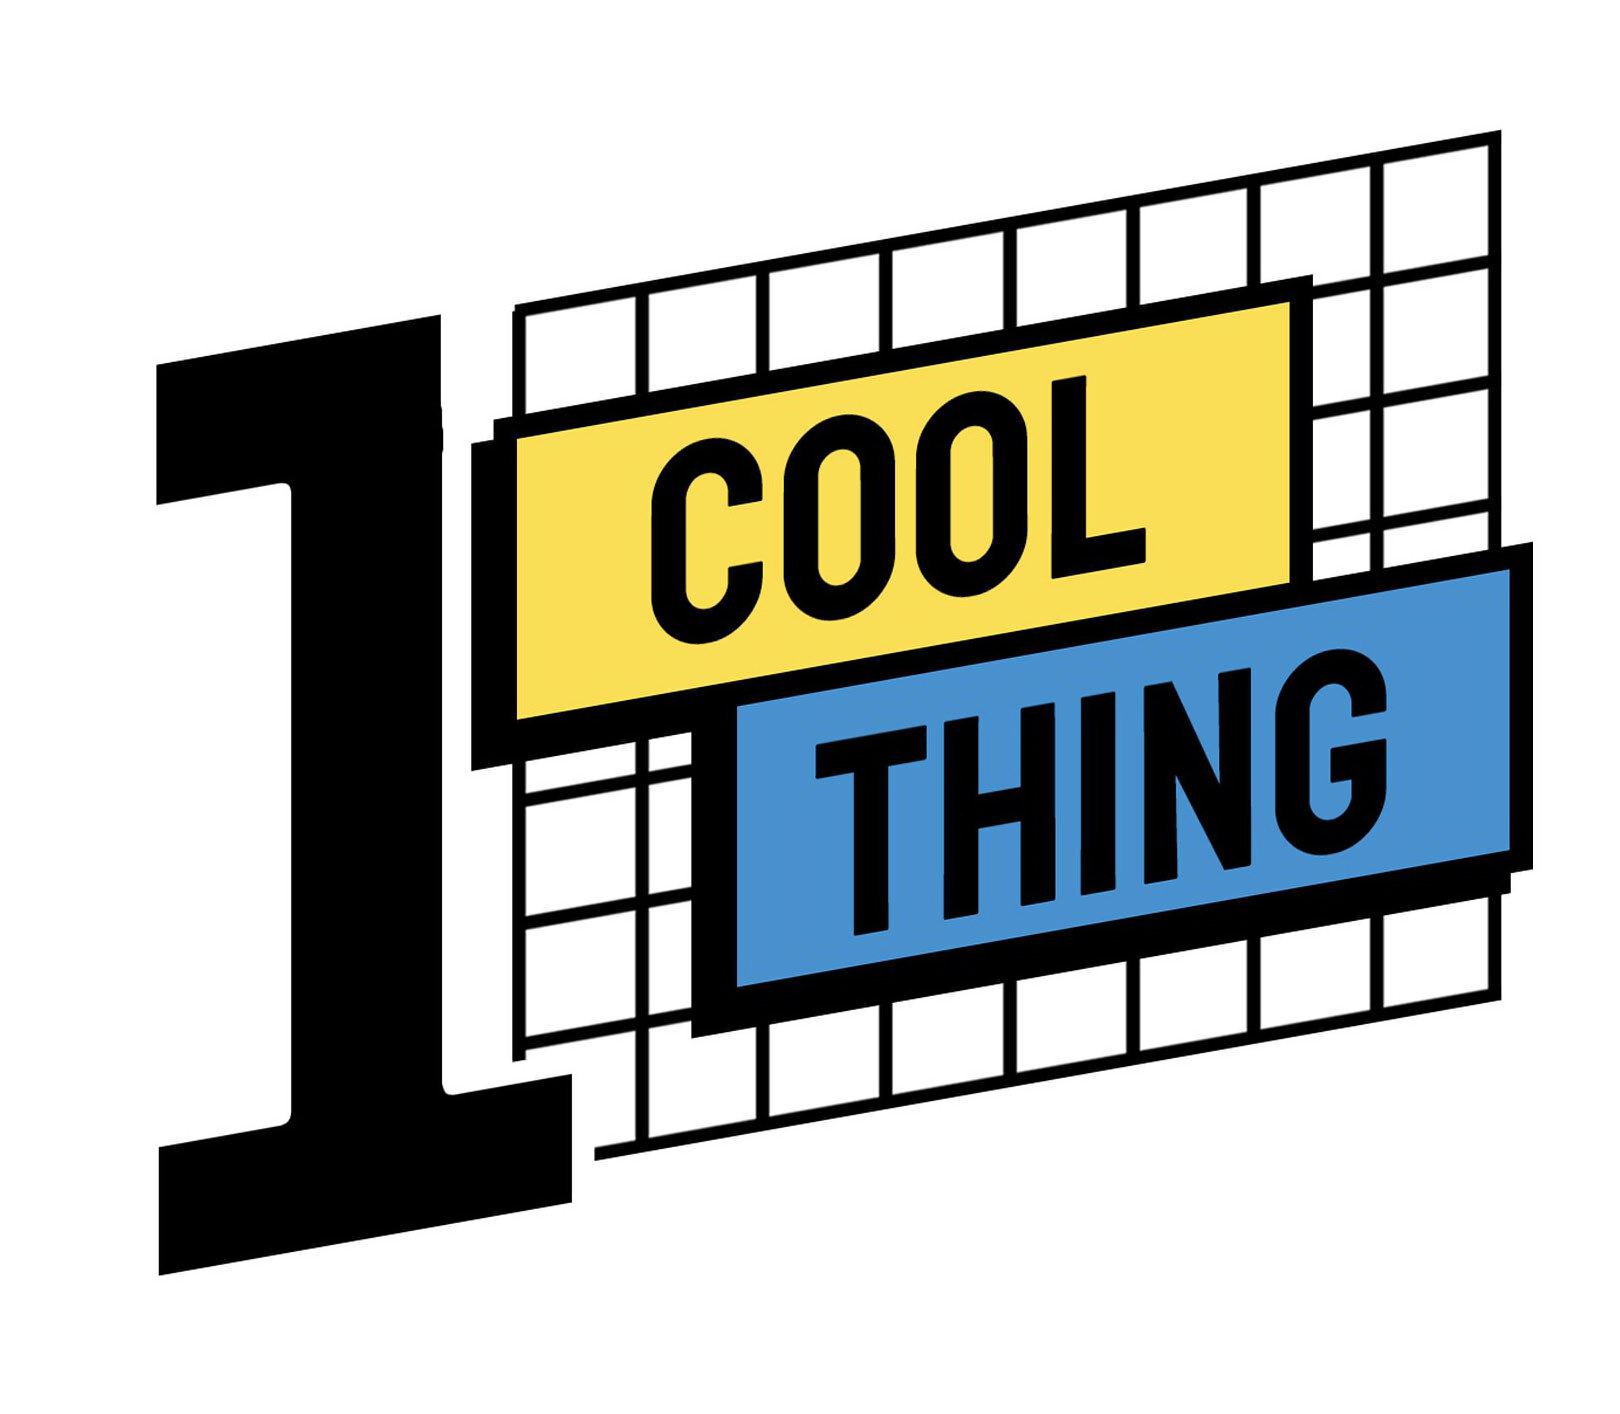  1 COOL THING